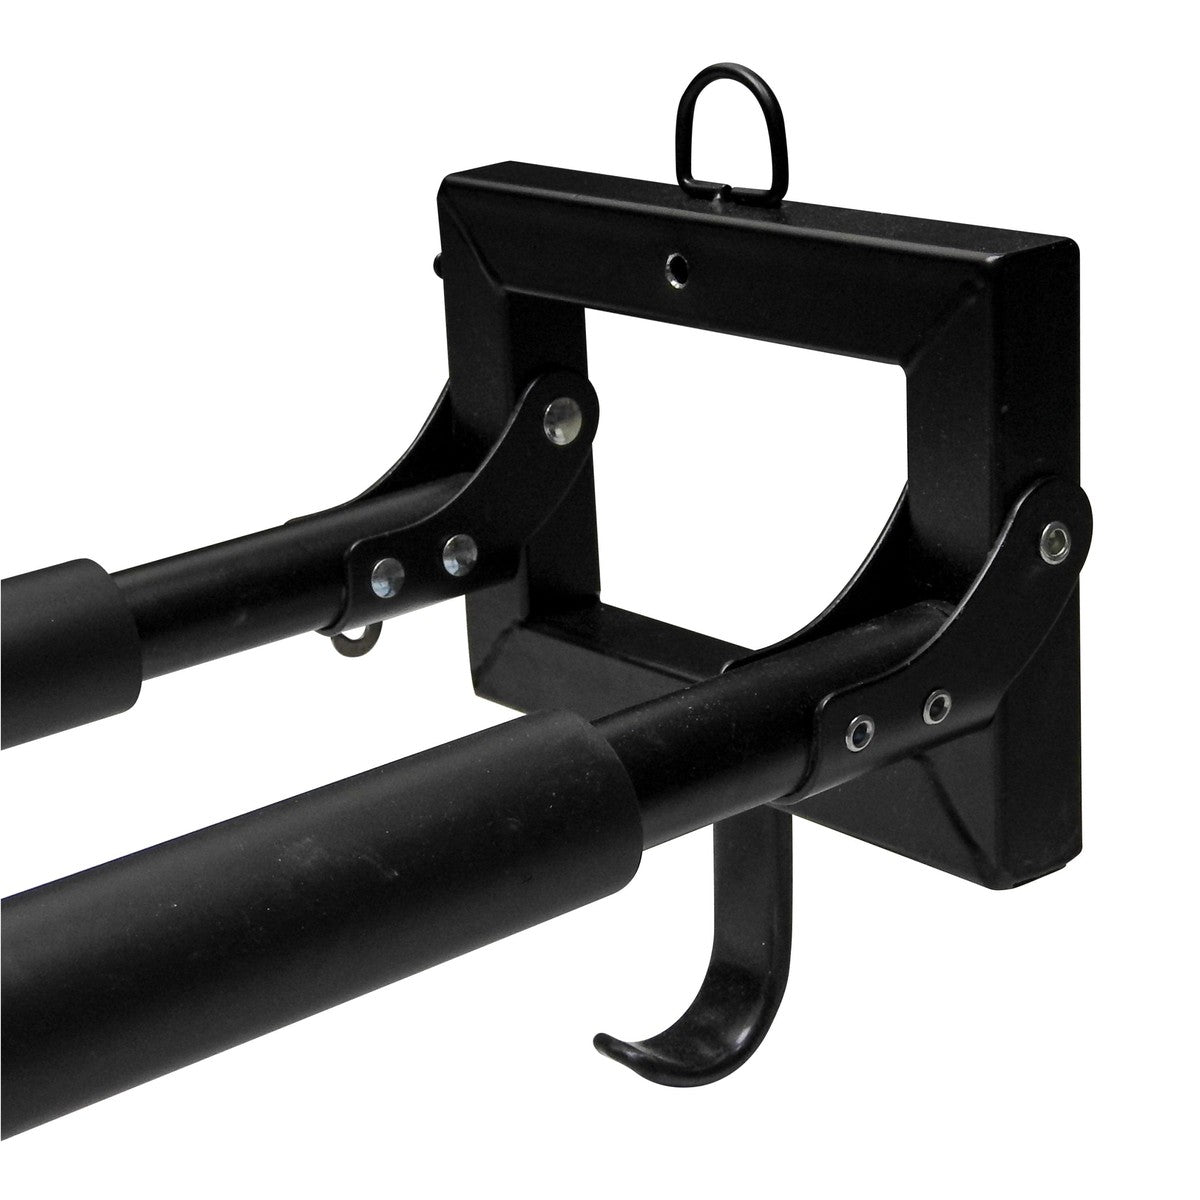 Extreme Max Qualifies for Free Shipping Extreme Max Heavy-Duty Steel Folding Kayak Storage Rack #3006.8441